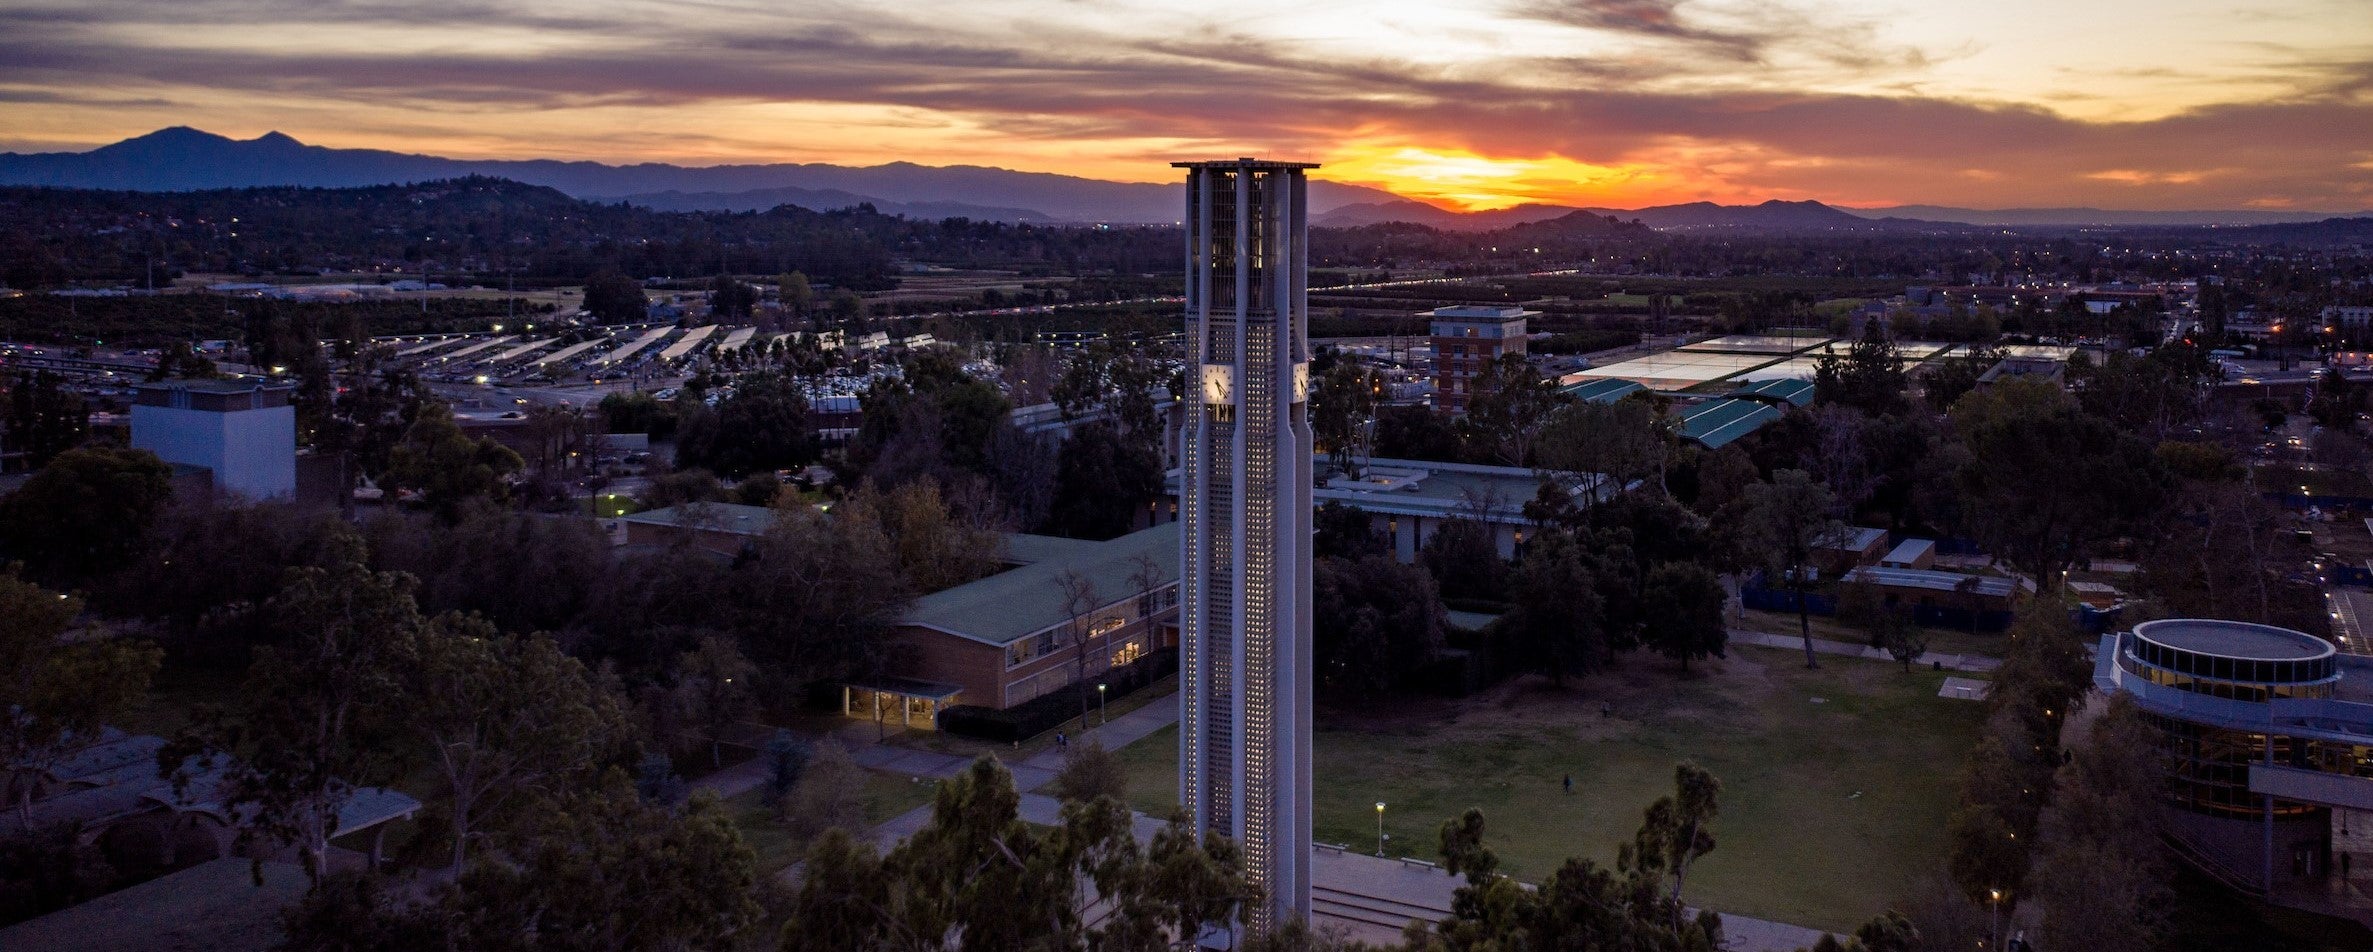 Campus Bell Tower at Night